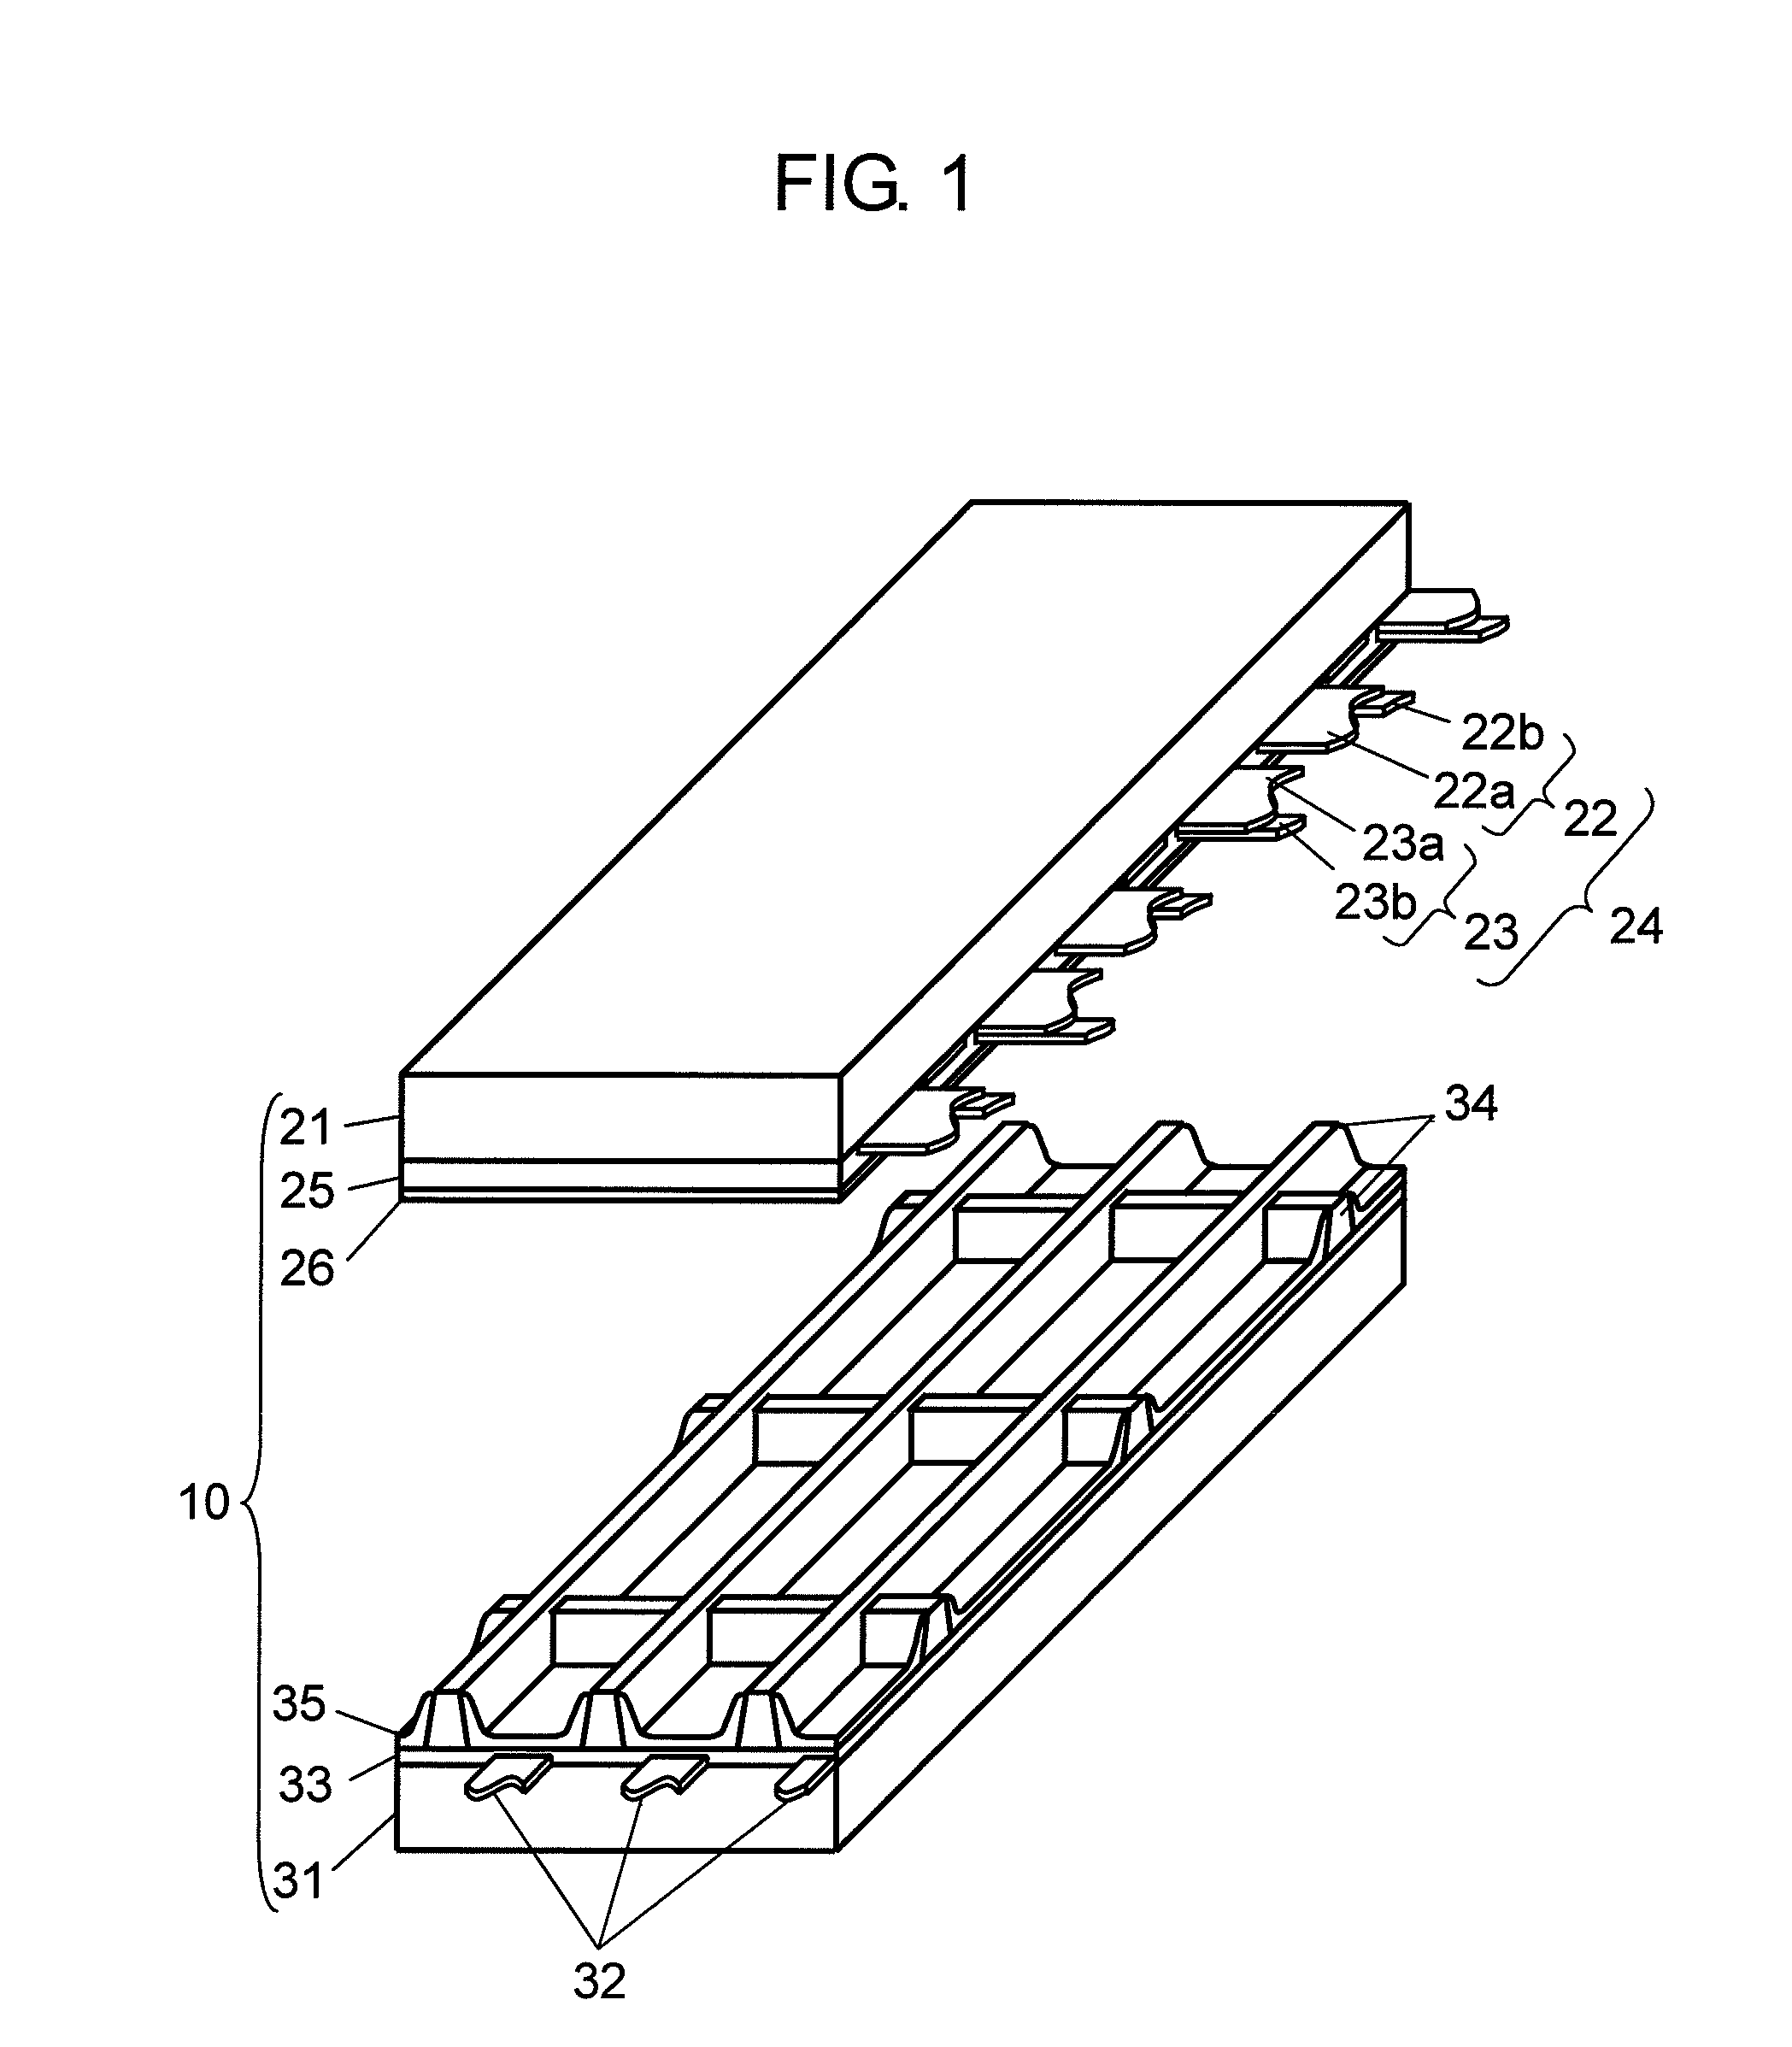 Plasma display panel incorporating a hydrogen-absorbing material